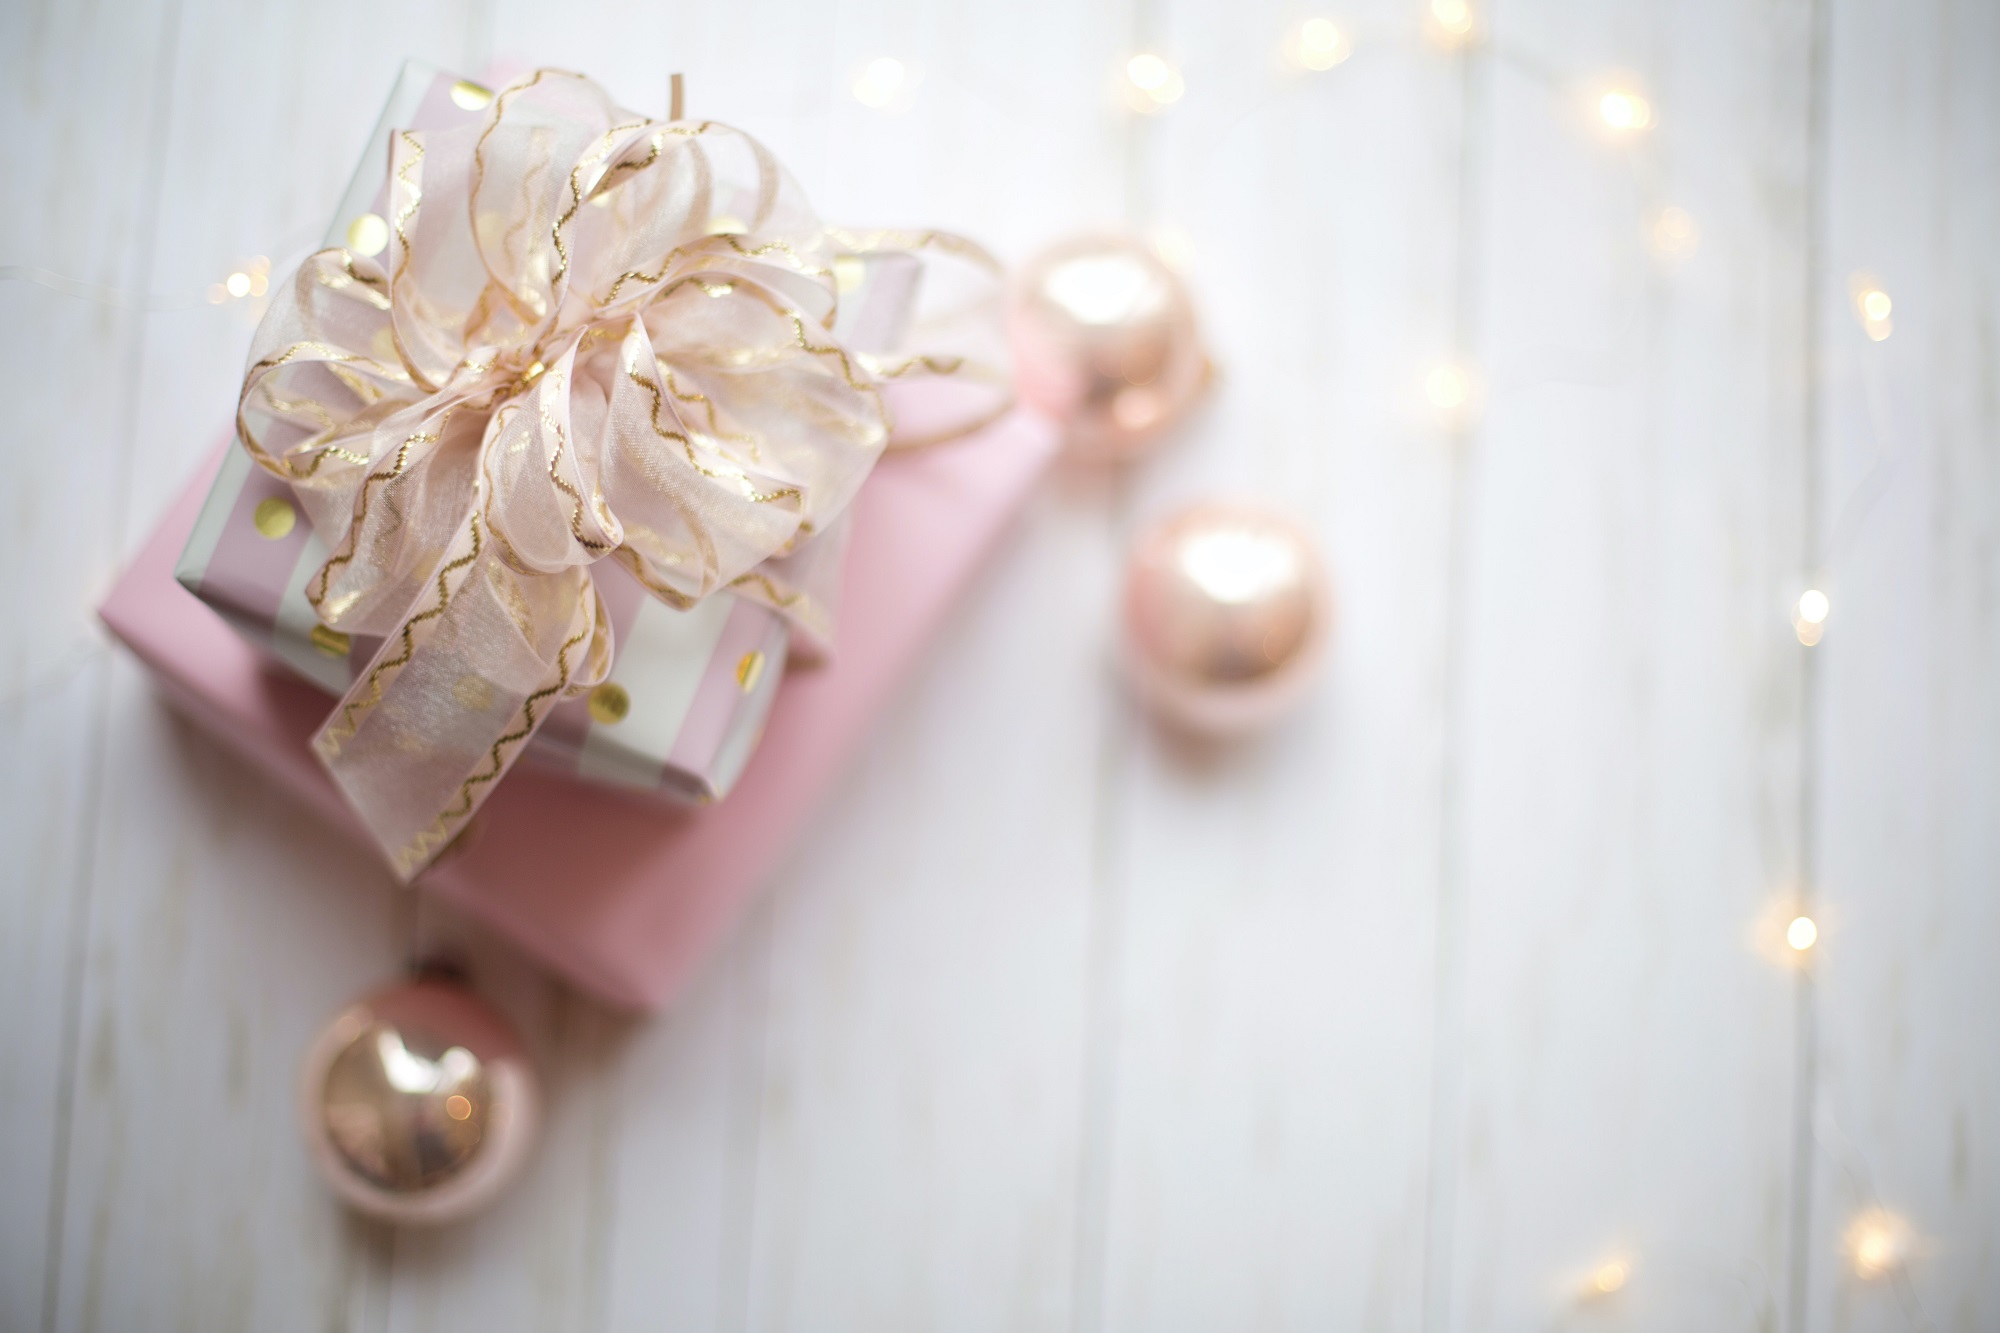 two-pink-and-white-gift-boxes-with-ribbon-3309659.jpg